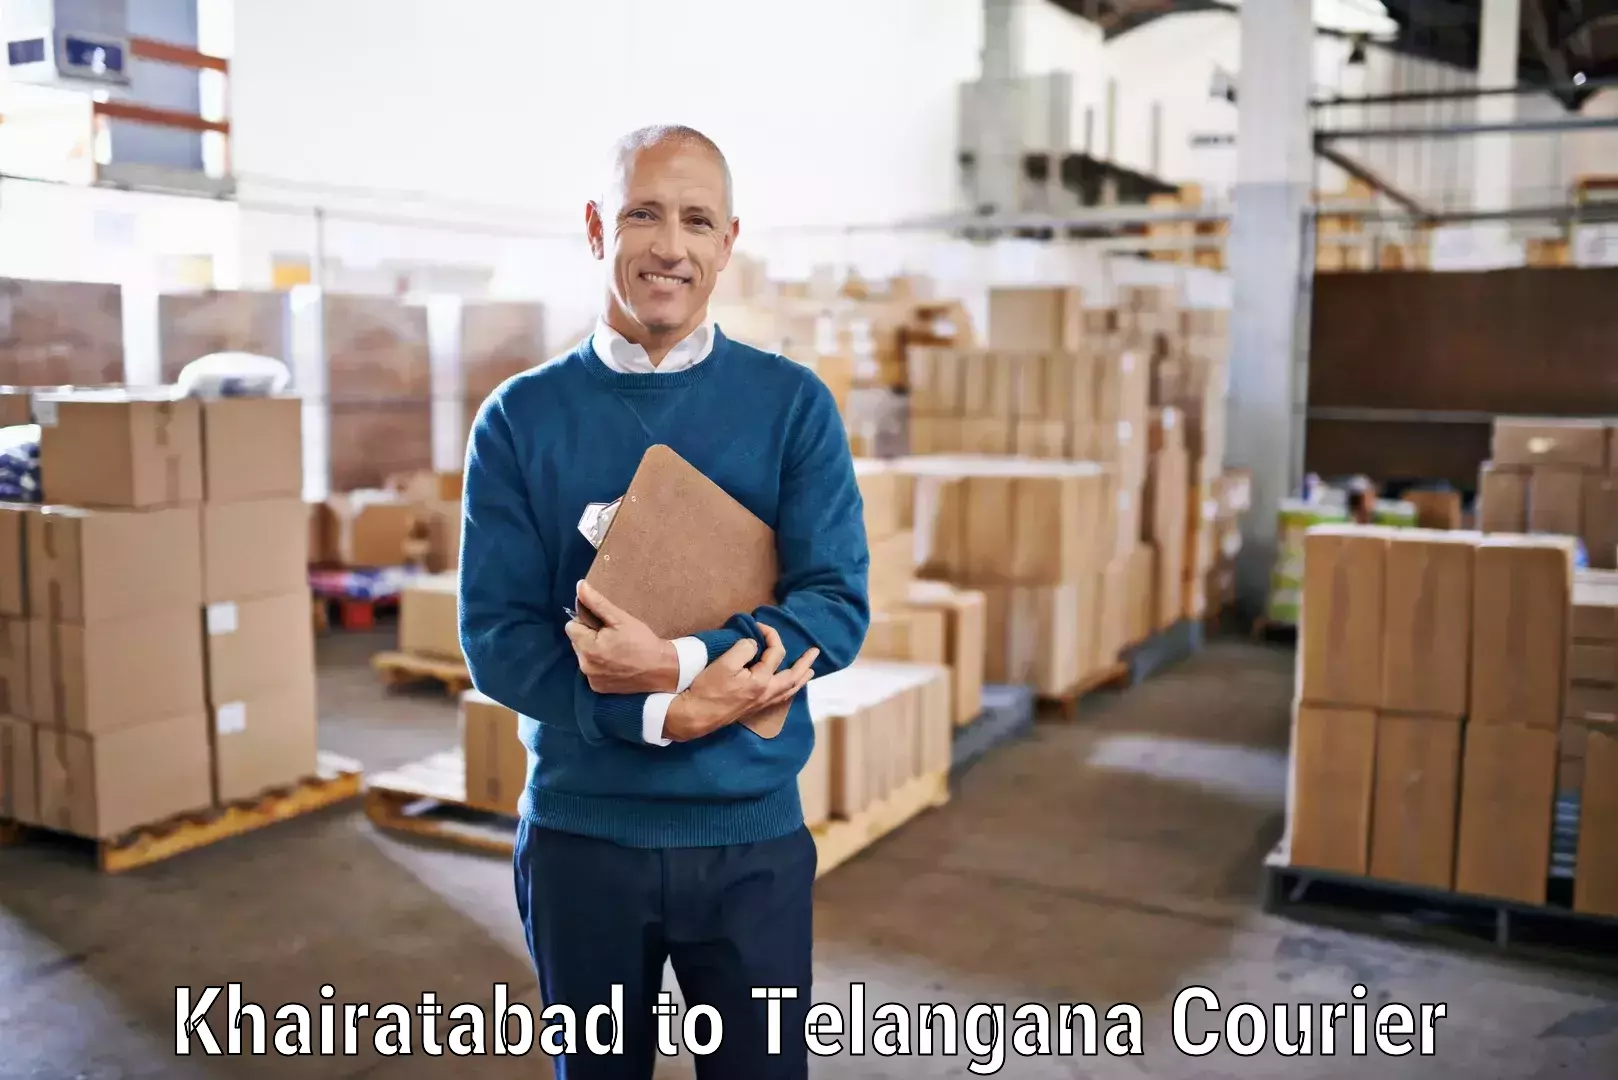 Tailored shipping plans Khairatabad to Hyderabad